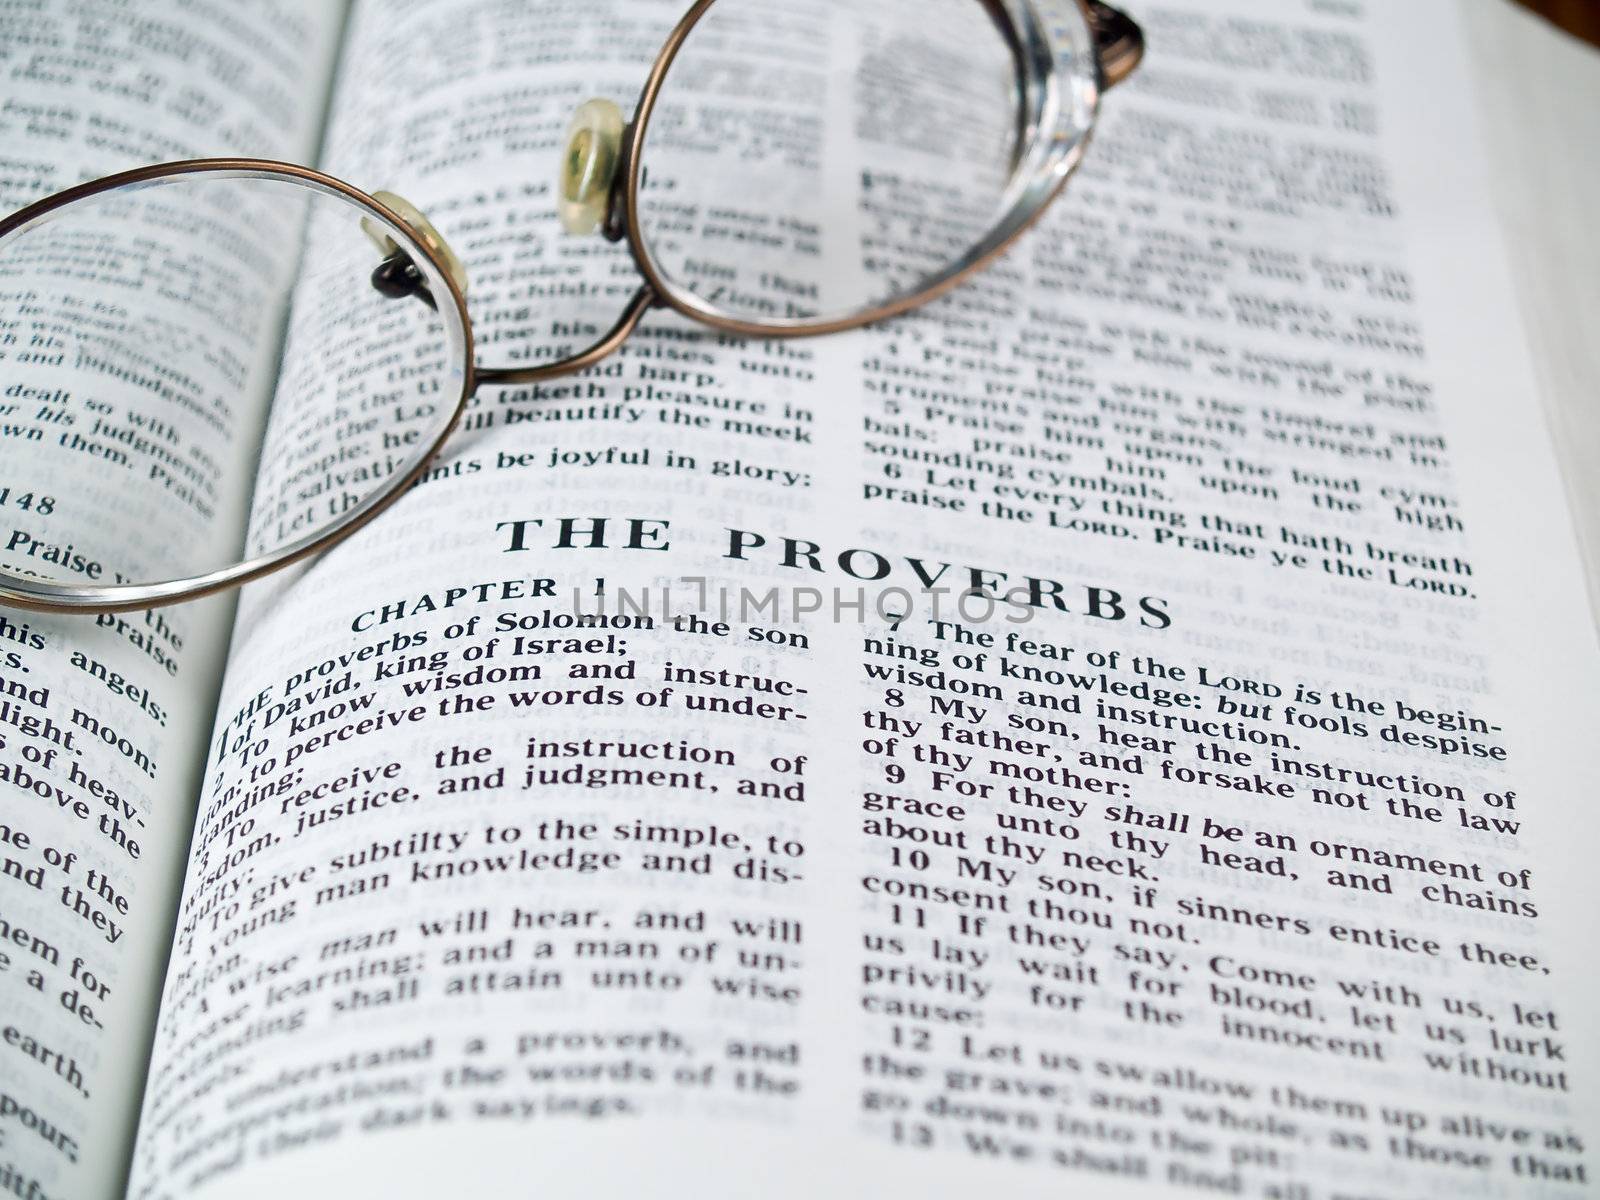 The Bible opened to the Book of Proverbs